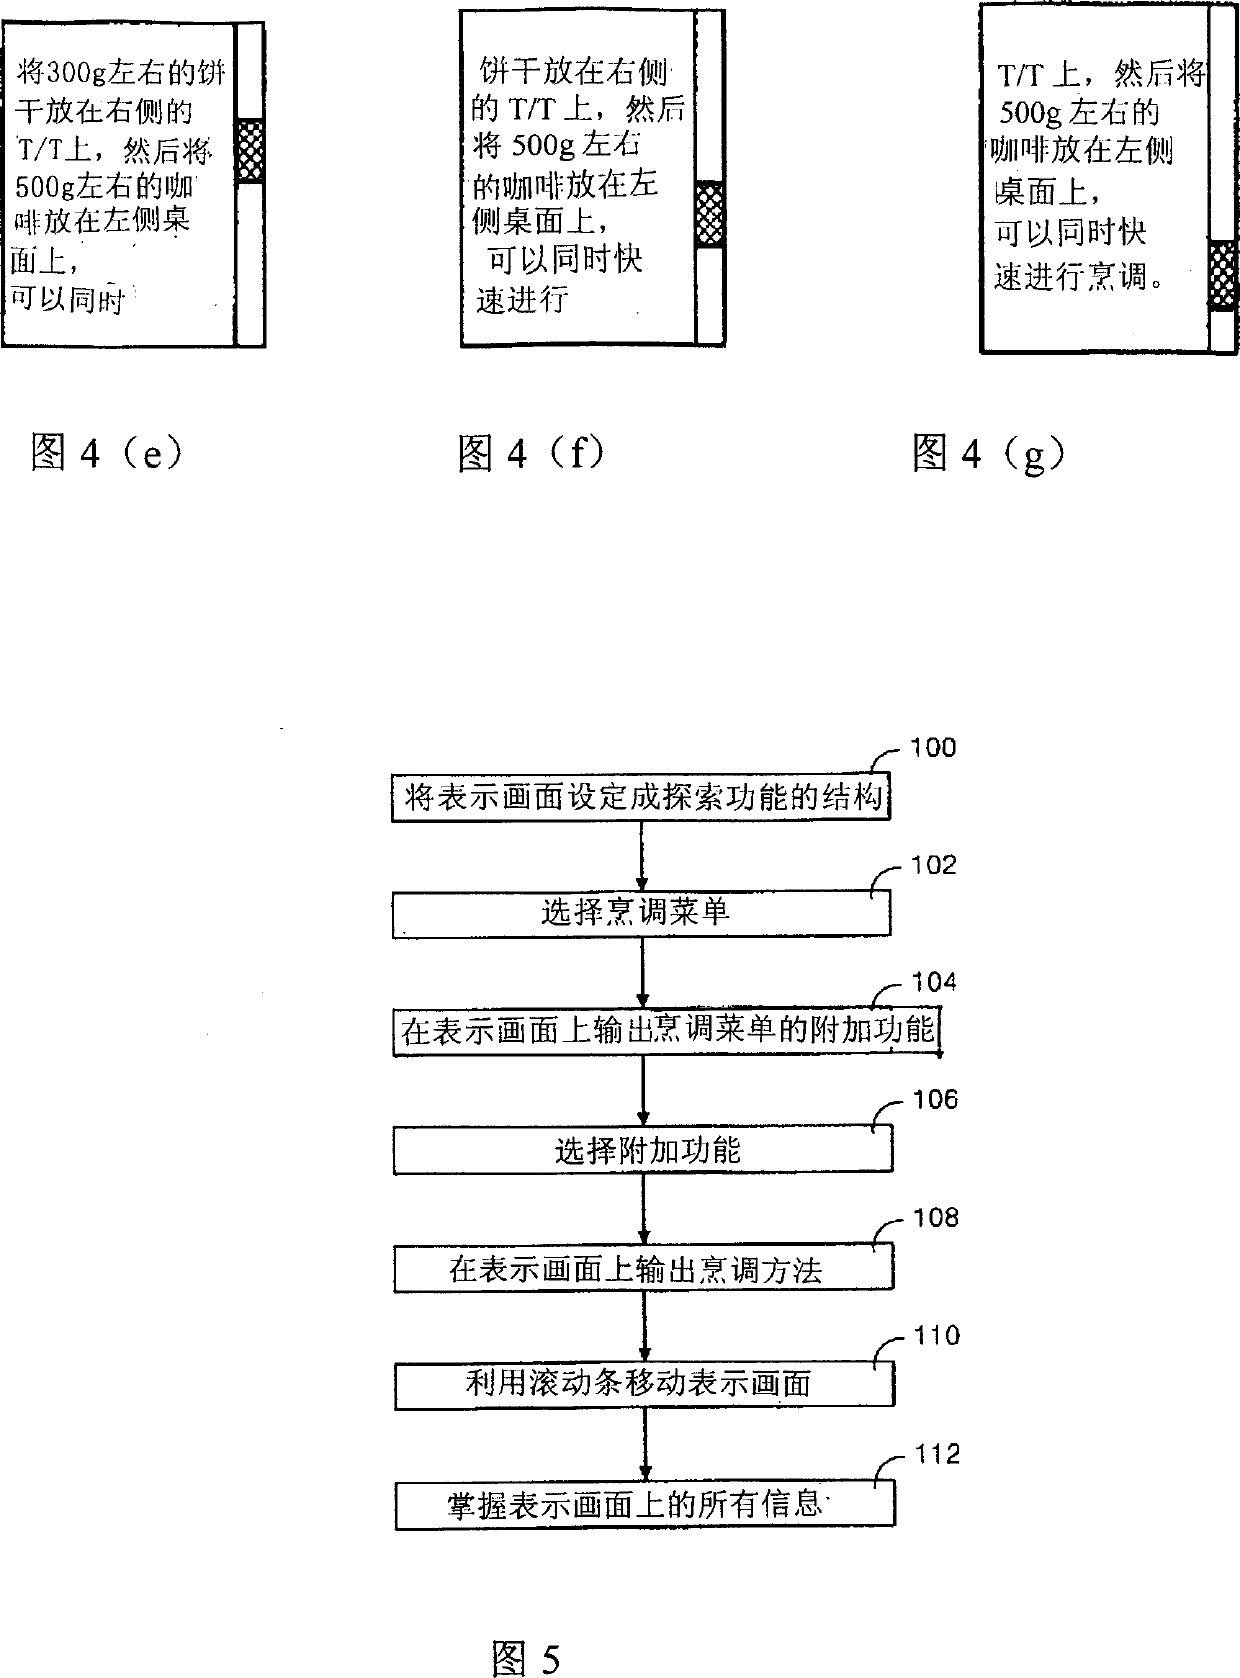 Display control method of microwave oven